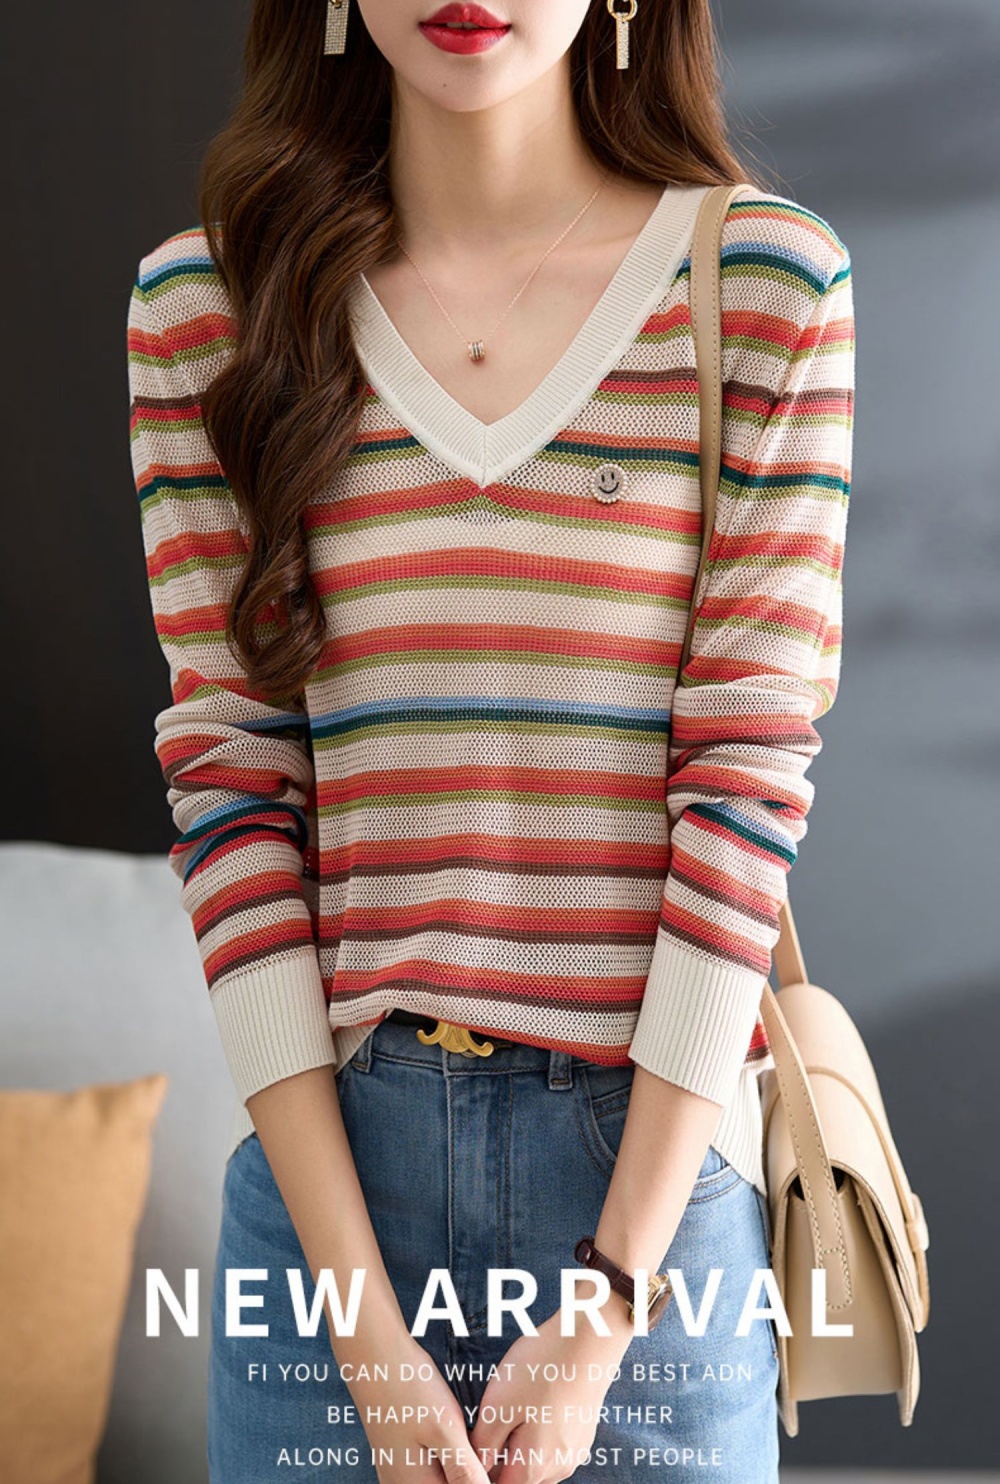 Stripe bottoming shirt unique sweater for women